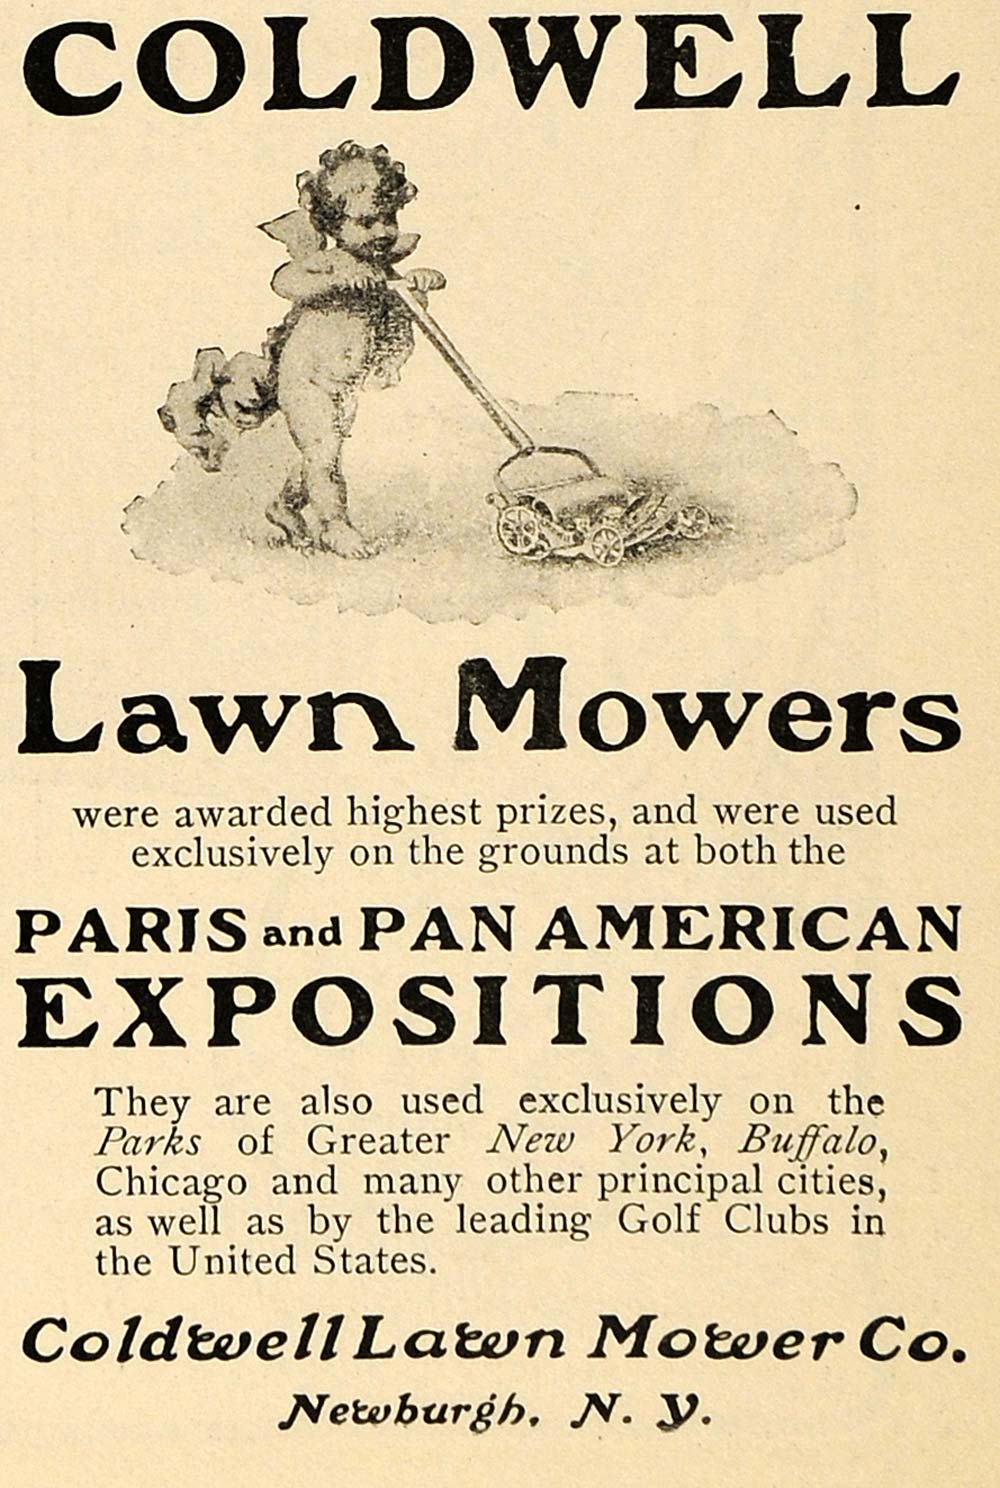 1902 Ad Coldwell Lawn Mowers Paris Exposition Cupid - ORIGINAL ADVERTISING TIN4